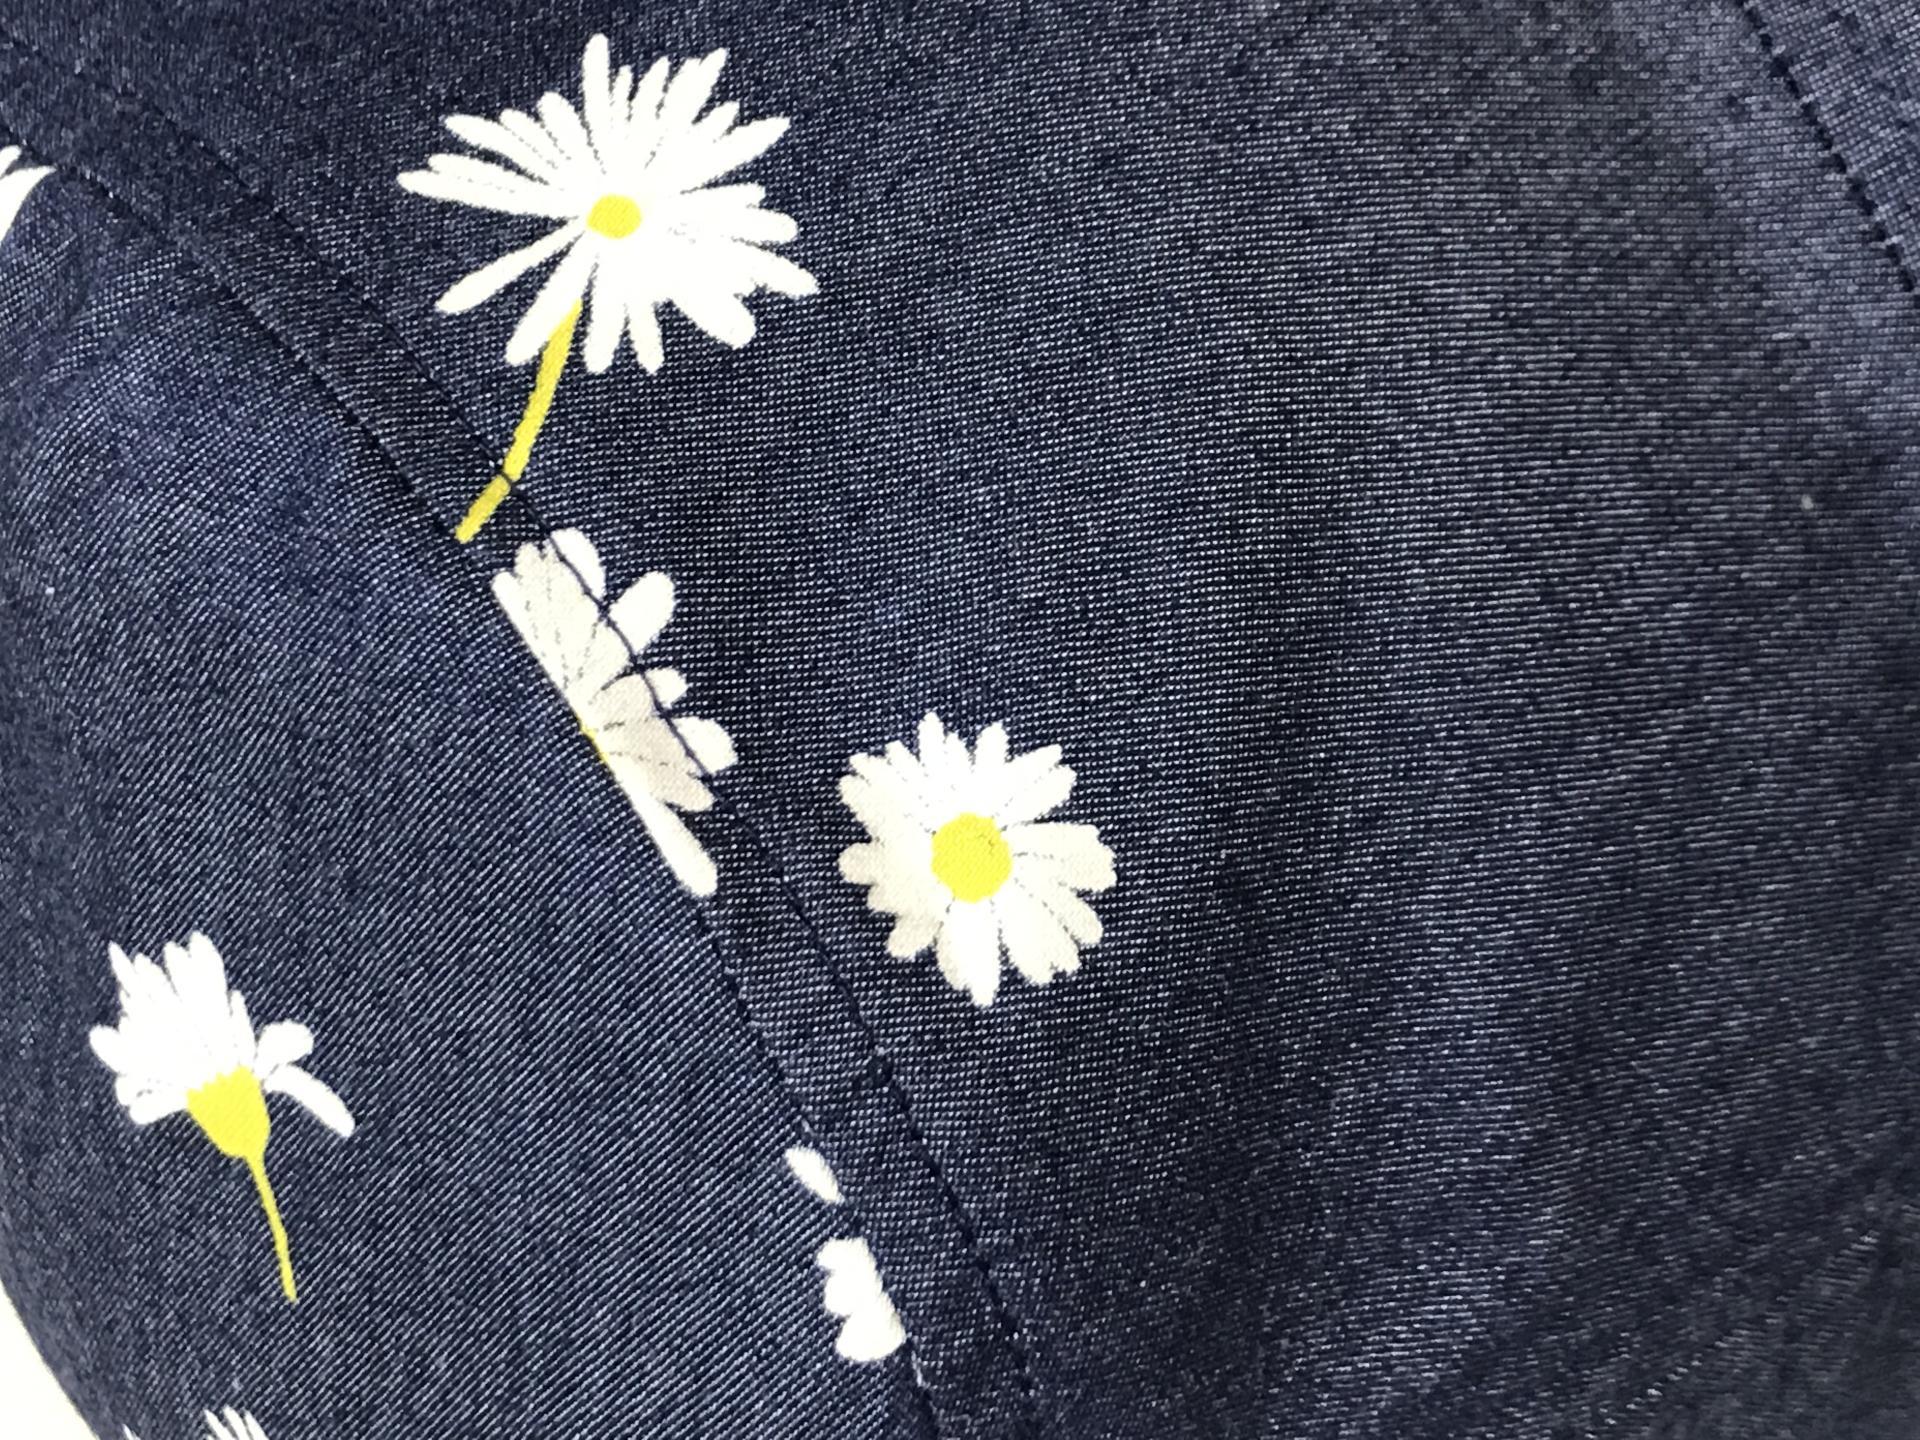 Close up showing small white daisies on denim